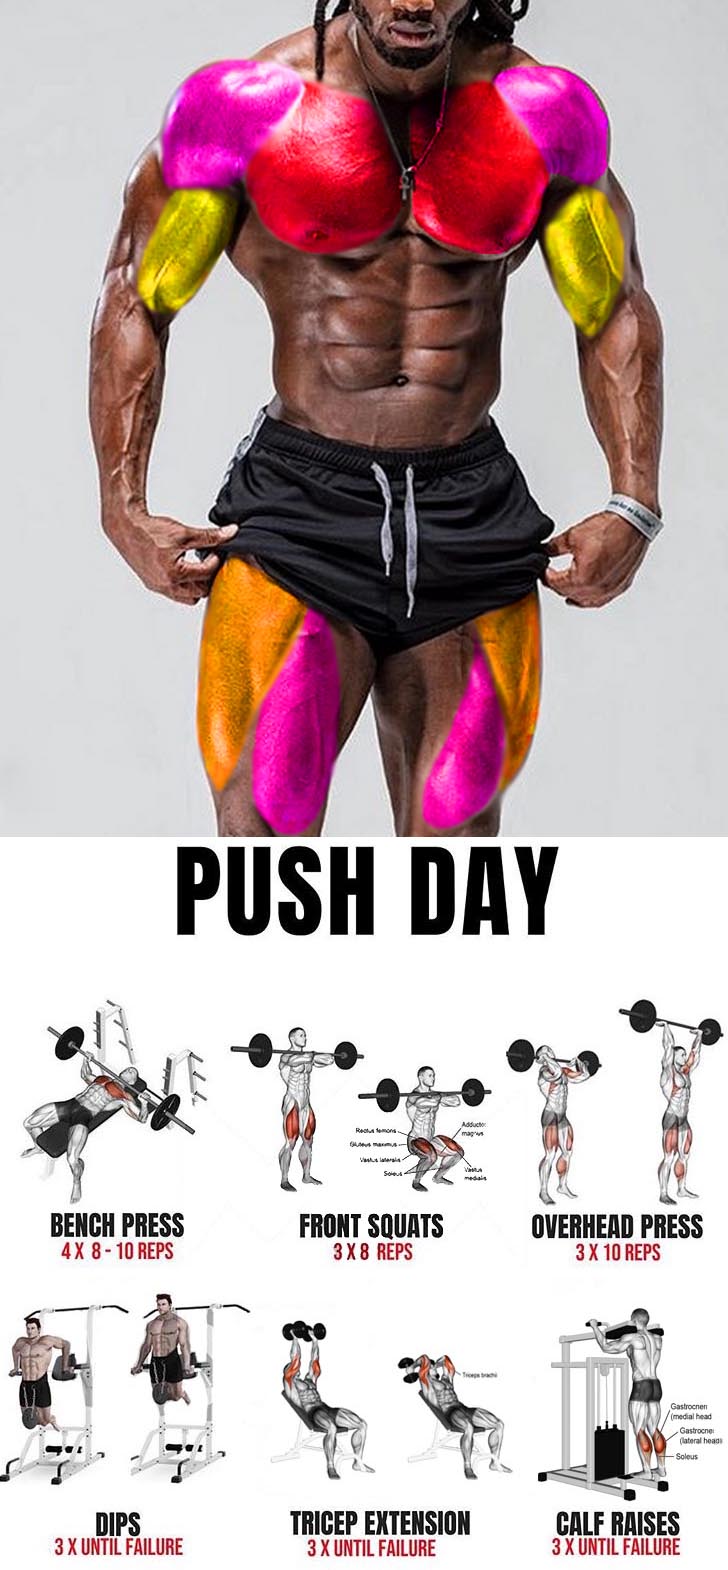 HOW TO PUSH DAY